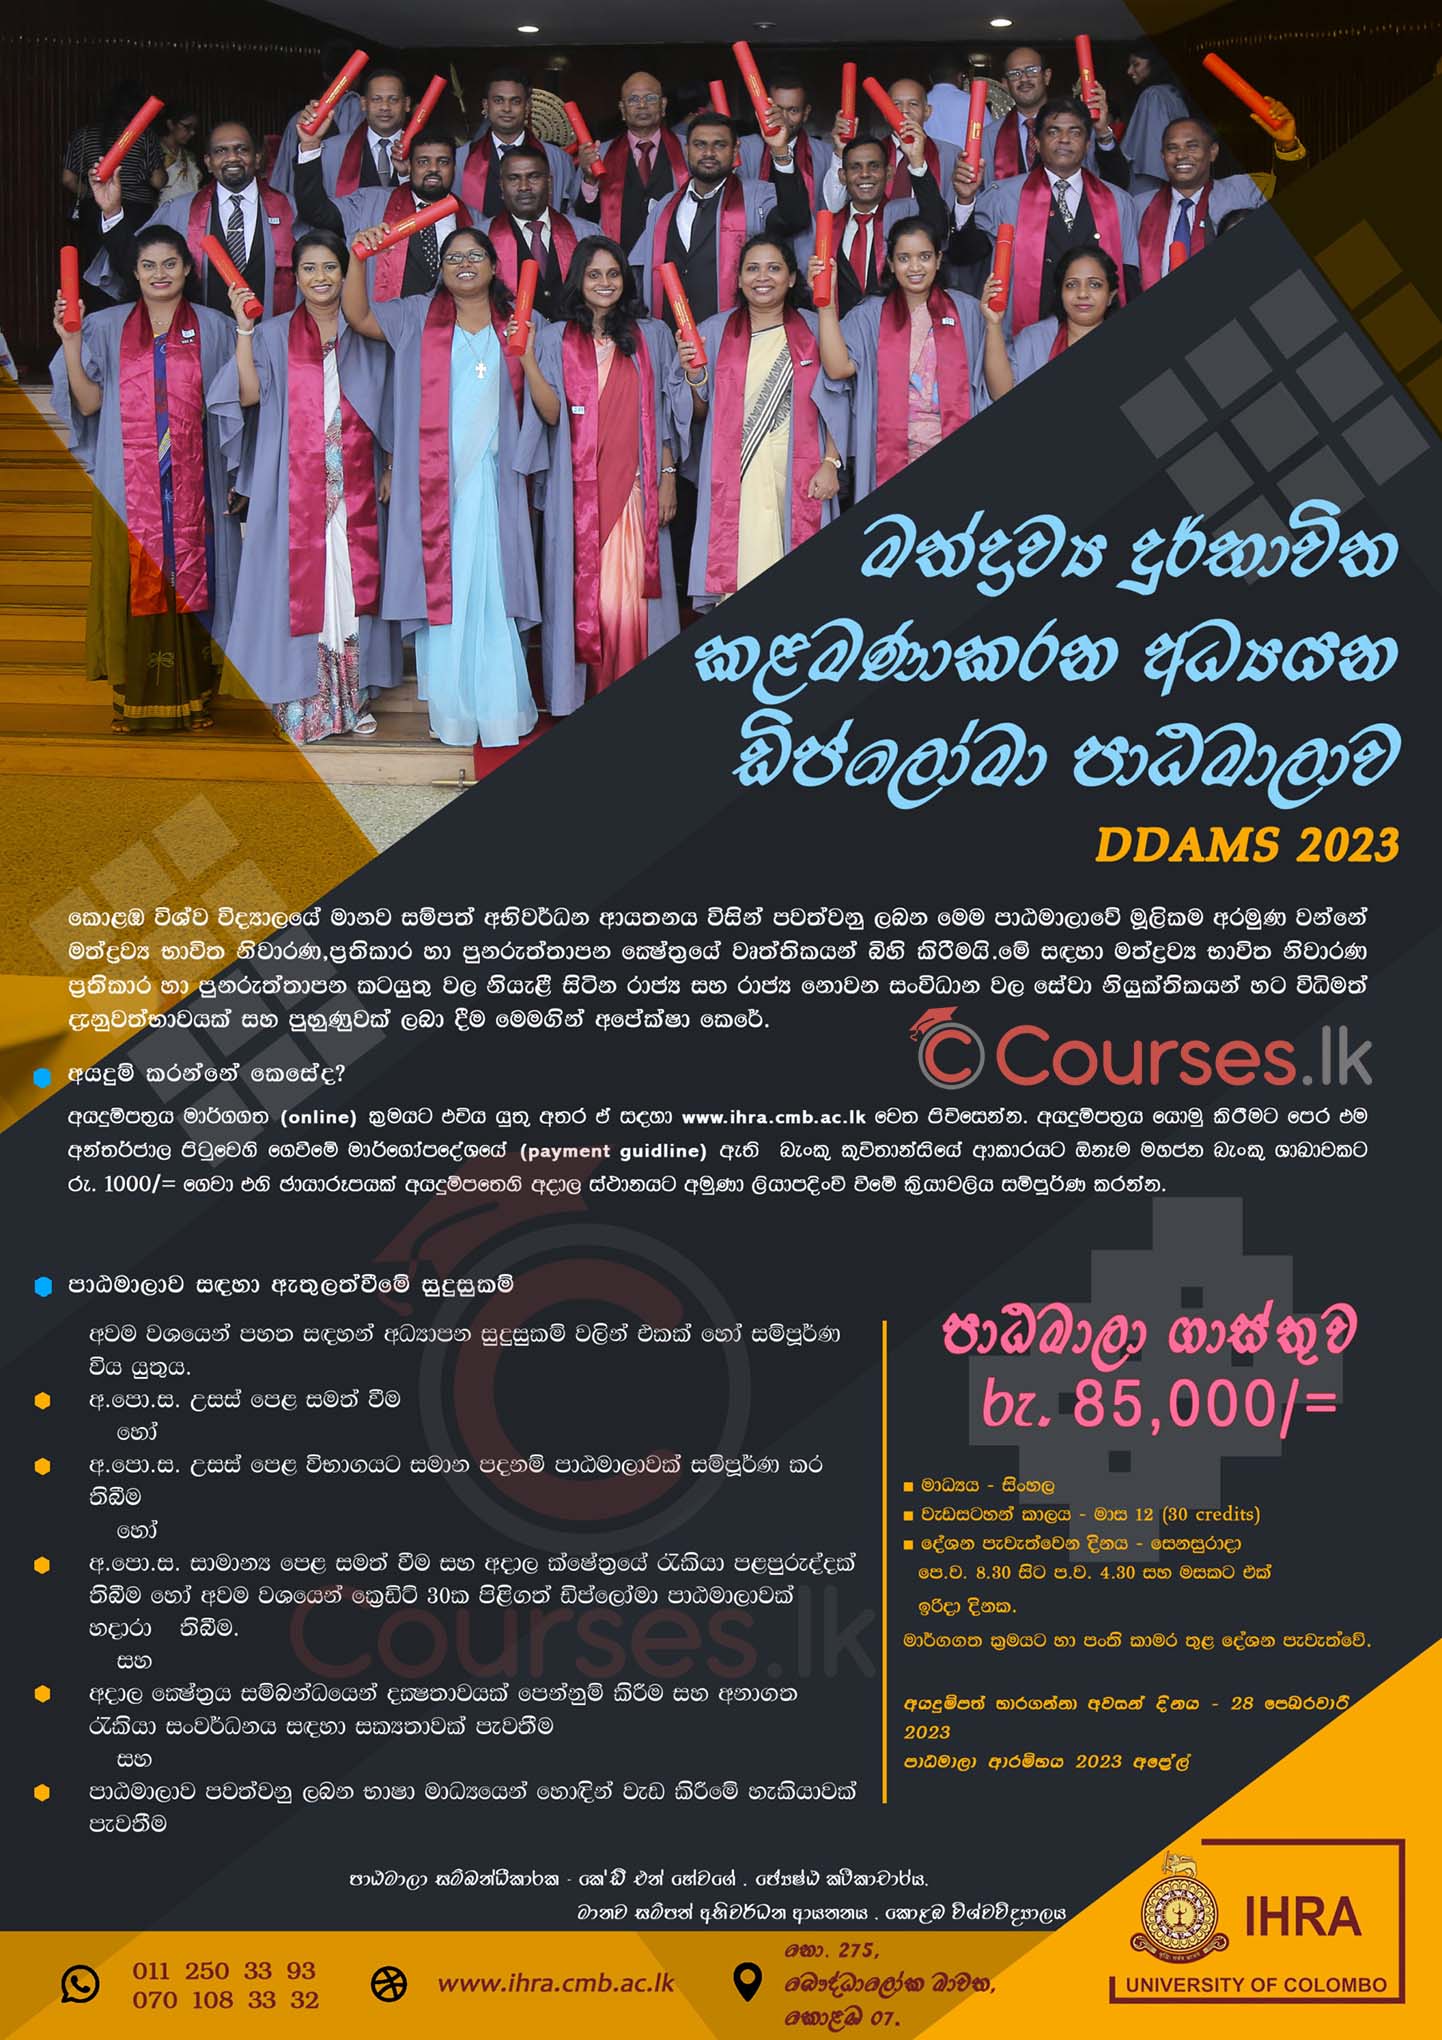 Call for Application Notice - Diploma in Drugs Abuse Management Studies (DDAMS) 2023 - University of Colombo